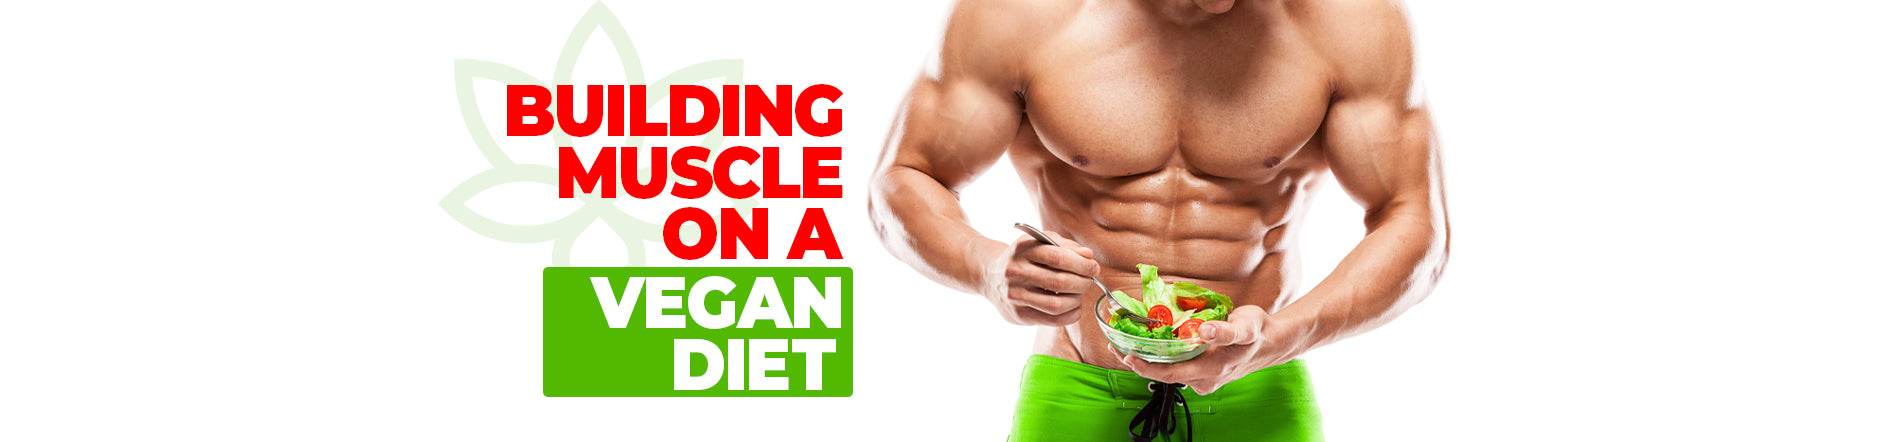 Building Muscle on a Vegan Diet Header with Athlete and Salad